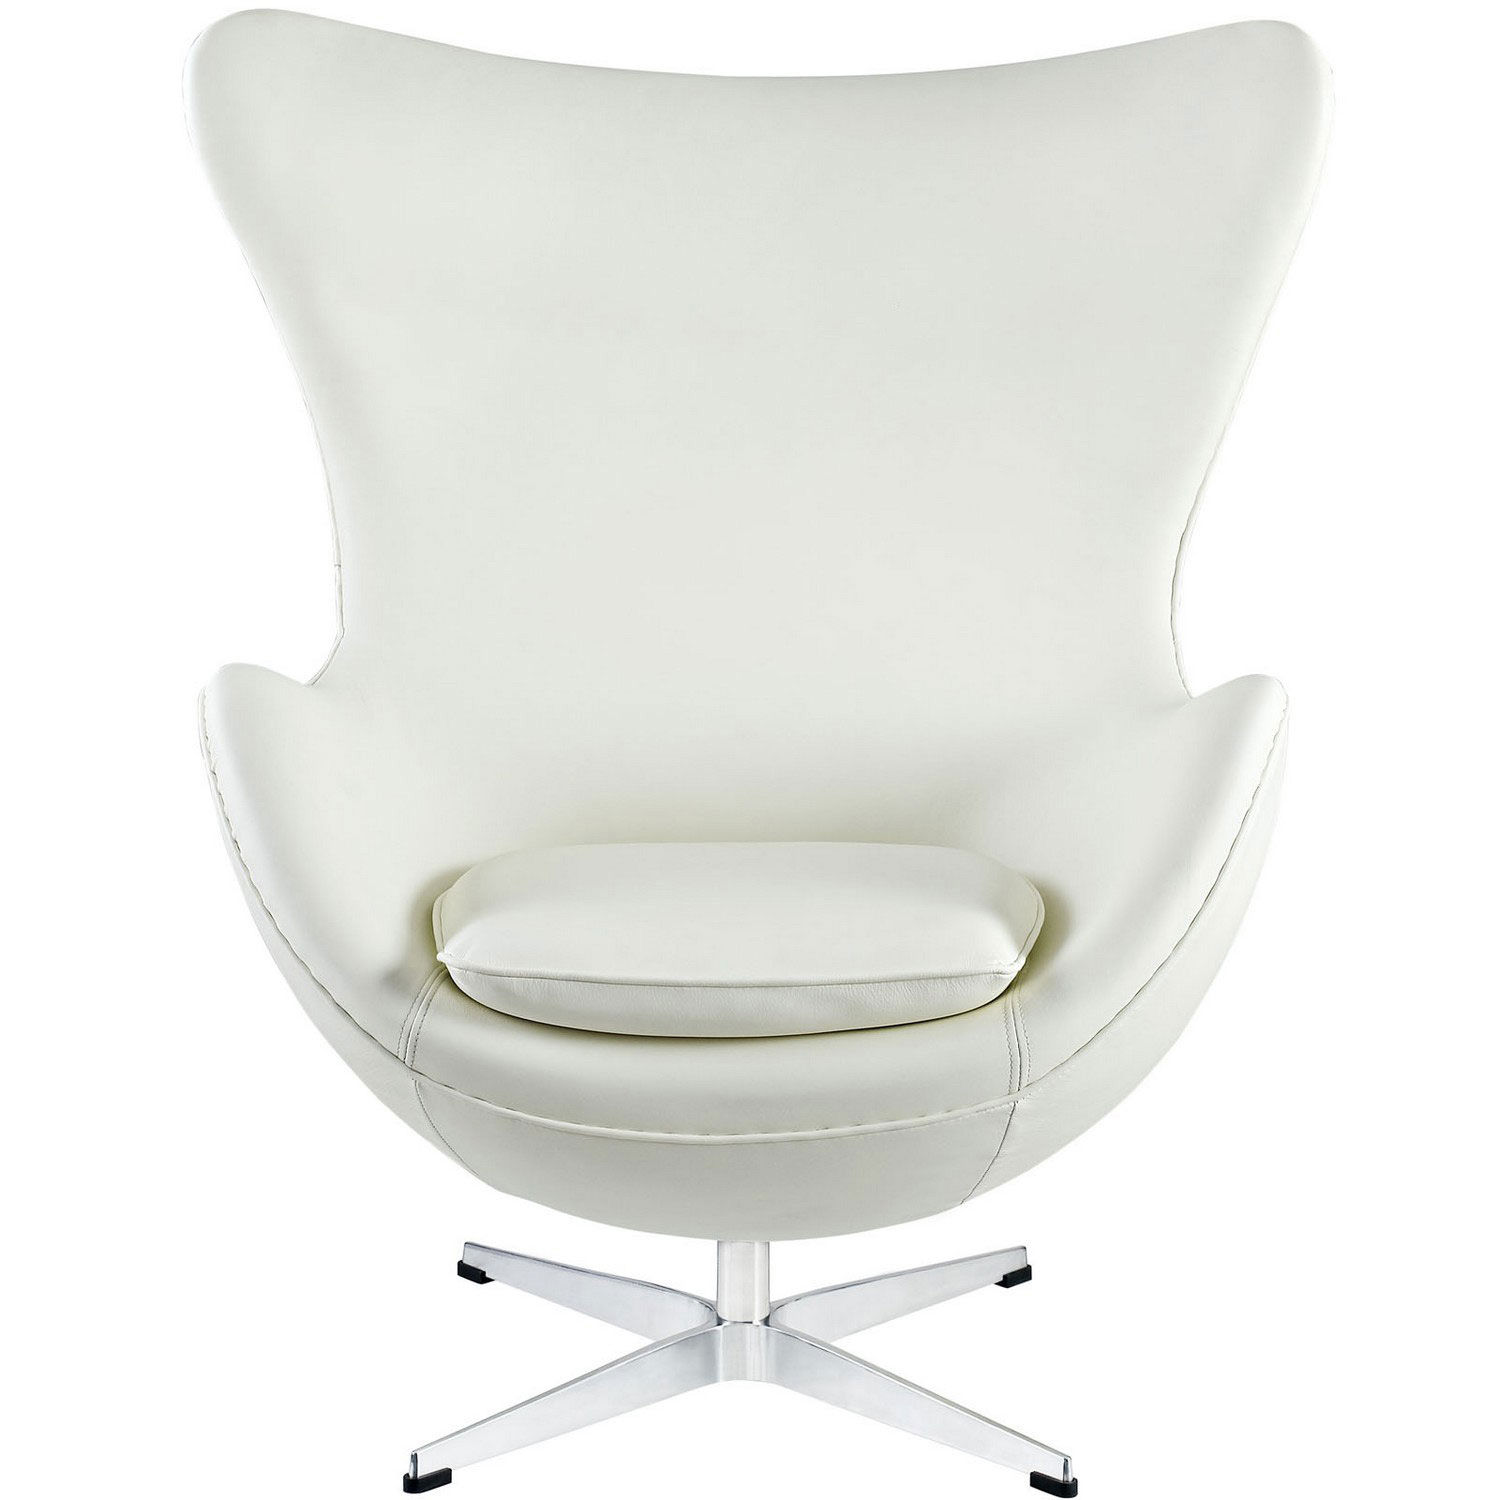 Modway Glove Leather Lounge Chair - White